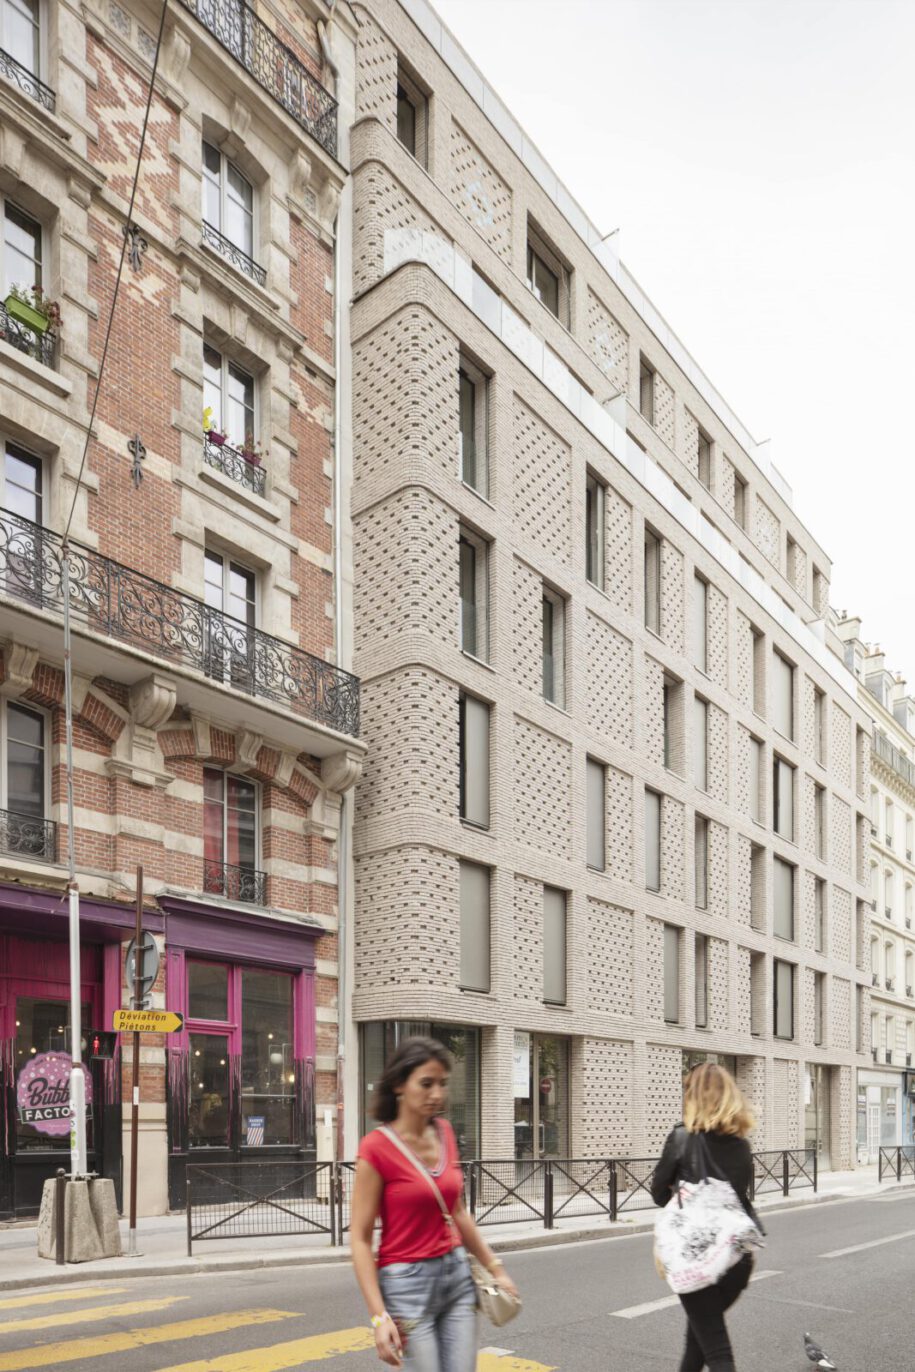 Archisearch Avenier Cornejo Architects completed a social housing development in the oldest Paris' street